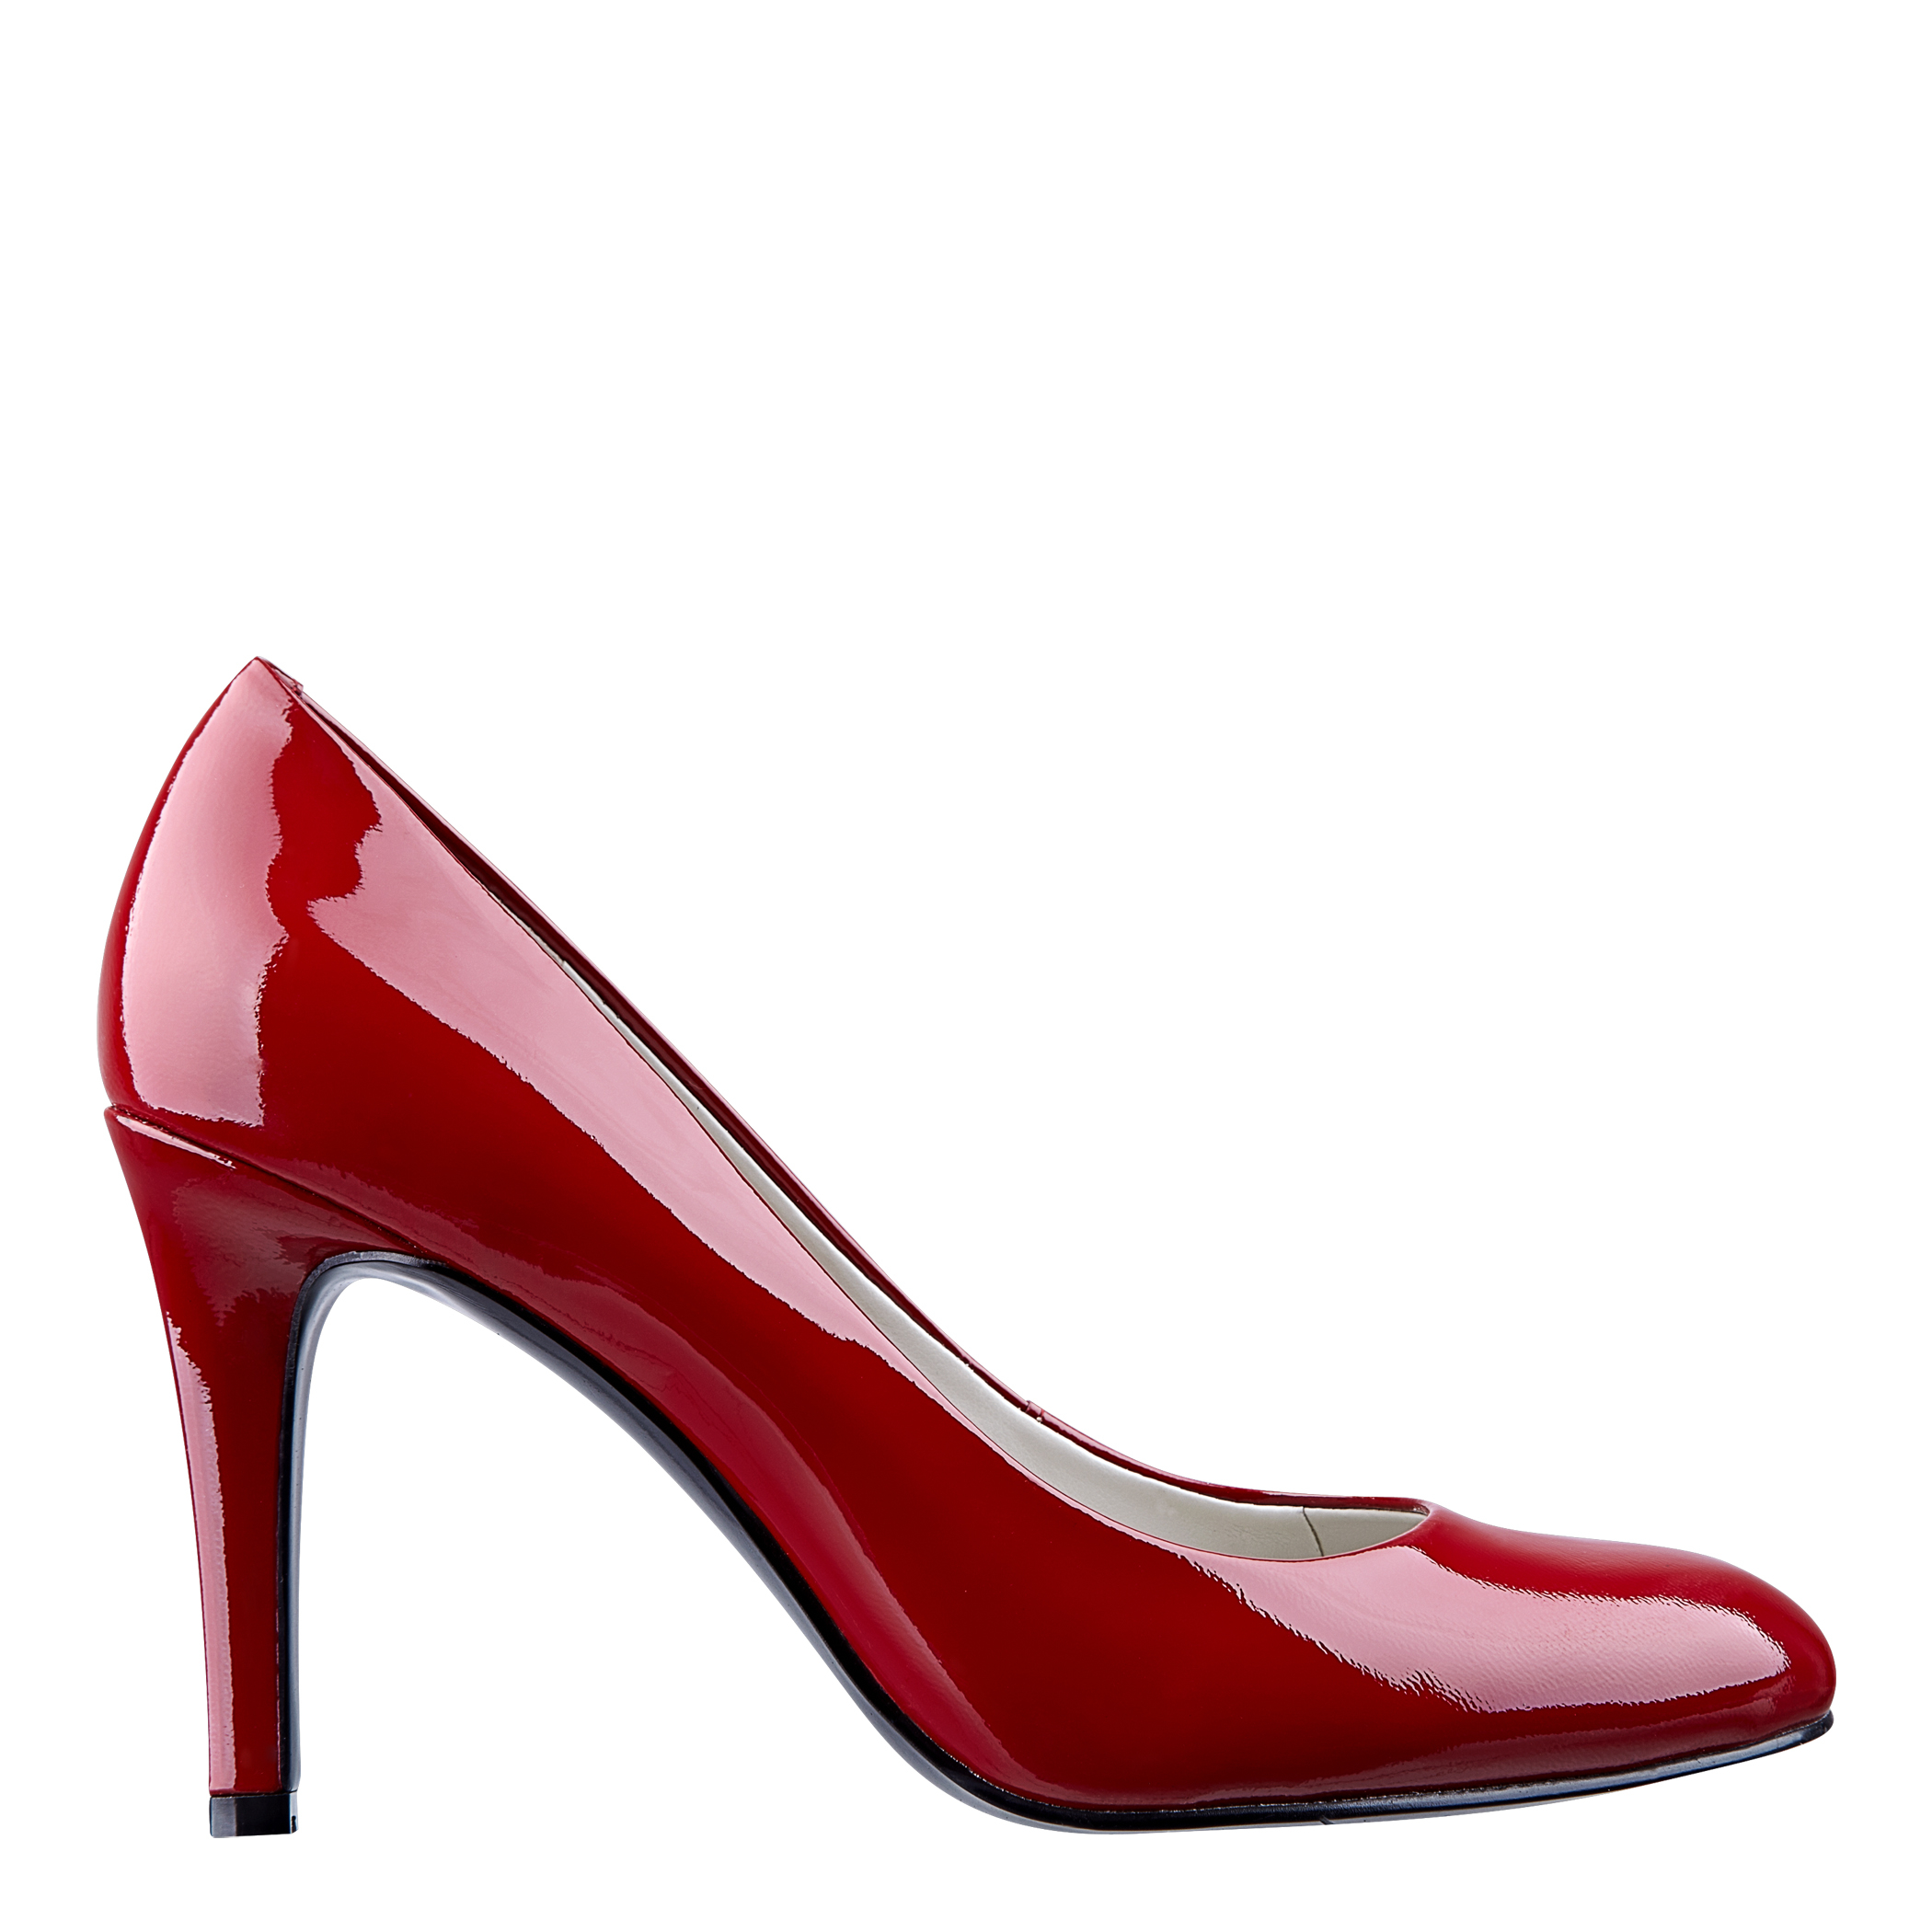 Nine West Caress Round Toe Pump in Red (SCARLET PATENT LEATHER) | Lyst